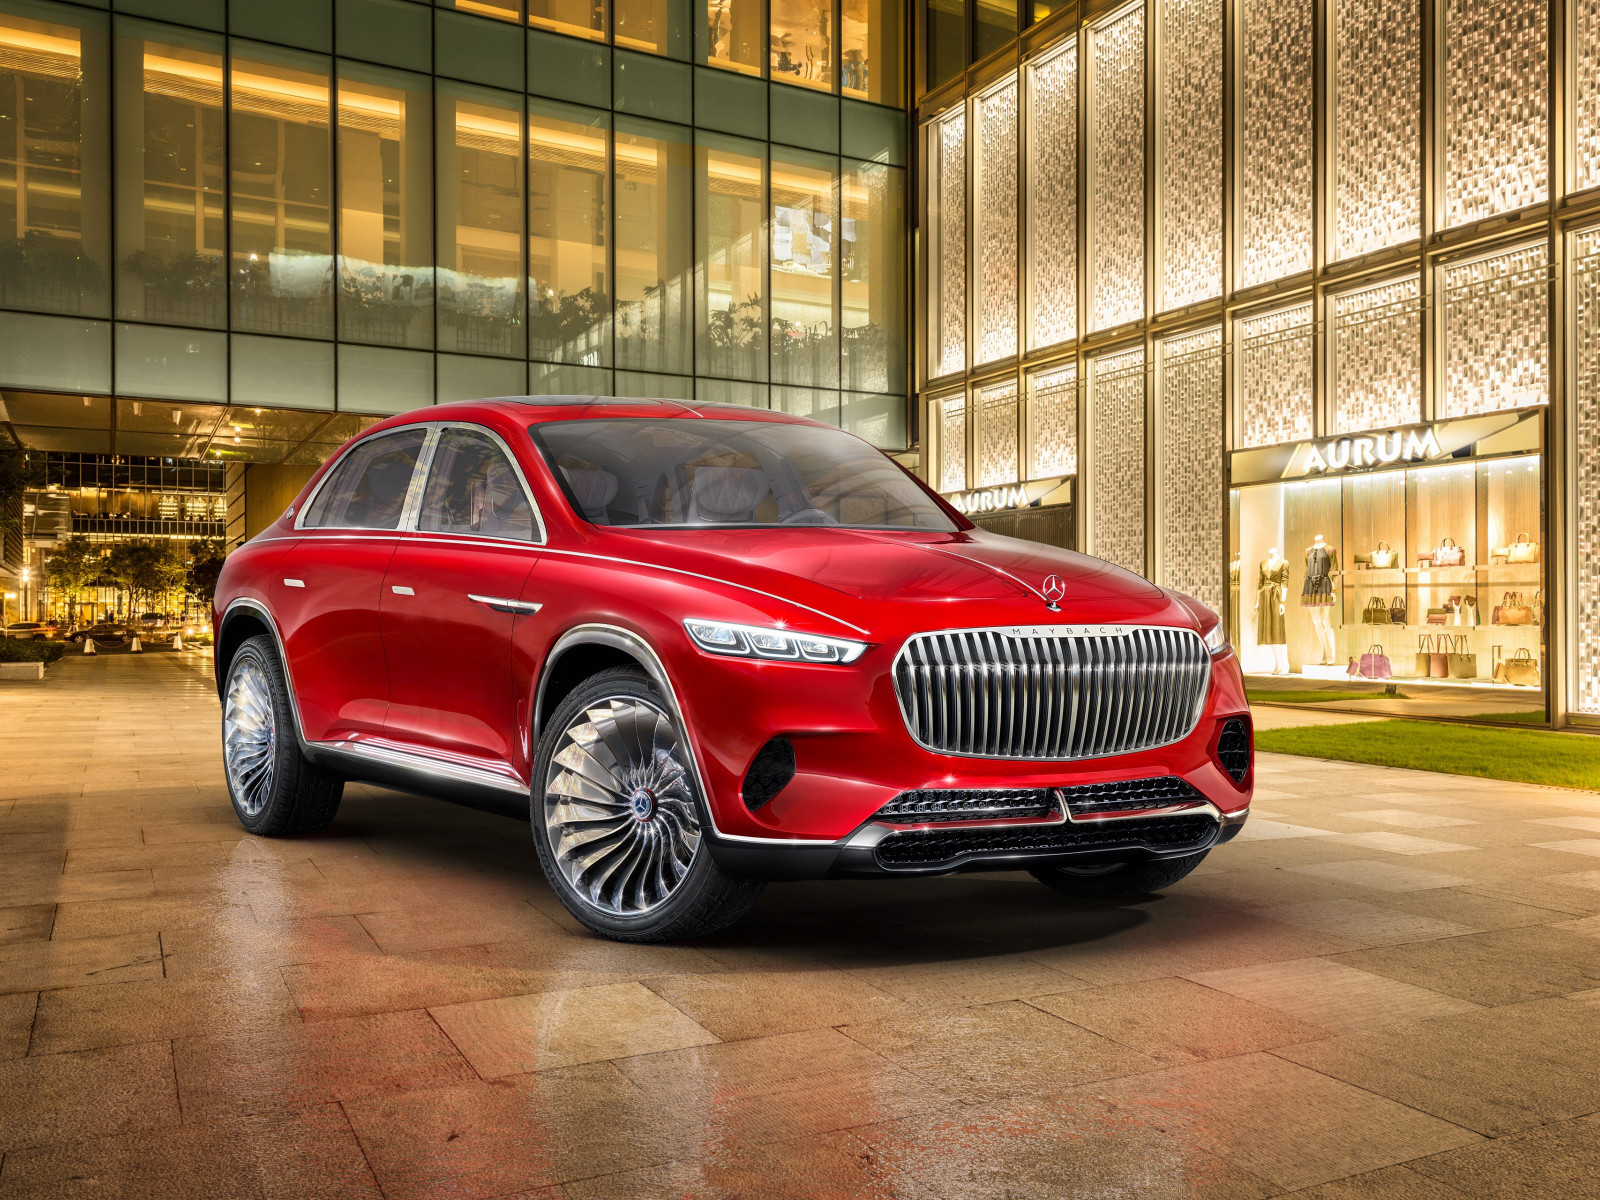 The Vision Mercedes Maybach Ultimate Luxury wallpaper 1600x1200